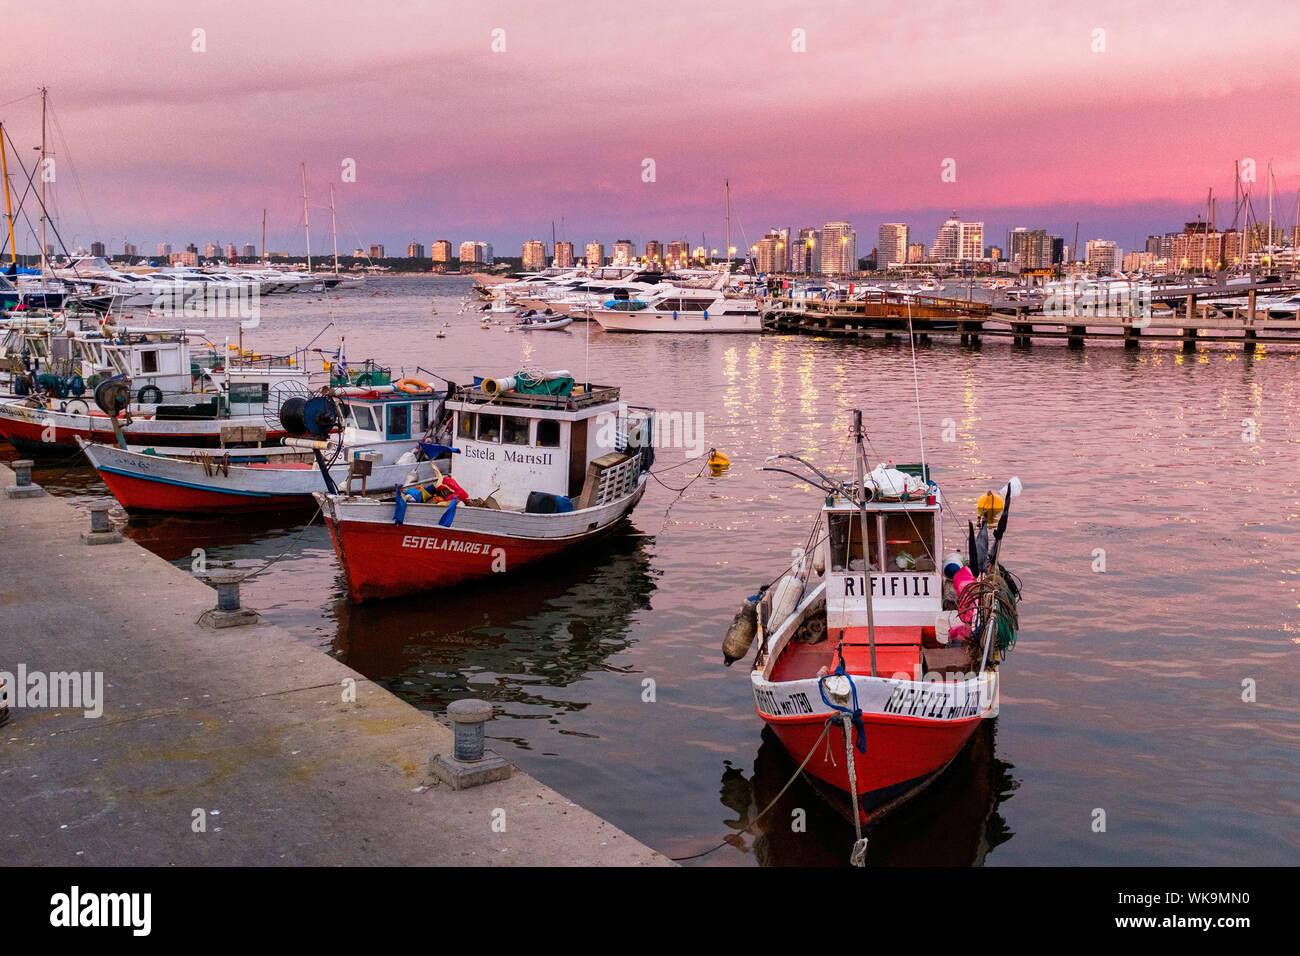 Uruguay: Punta del Este, city and seaside resort, a destination for the Argentinean and Brazilian jet set. At nightfall, the fishing port with traditi Stock Photo